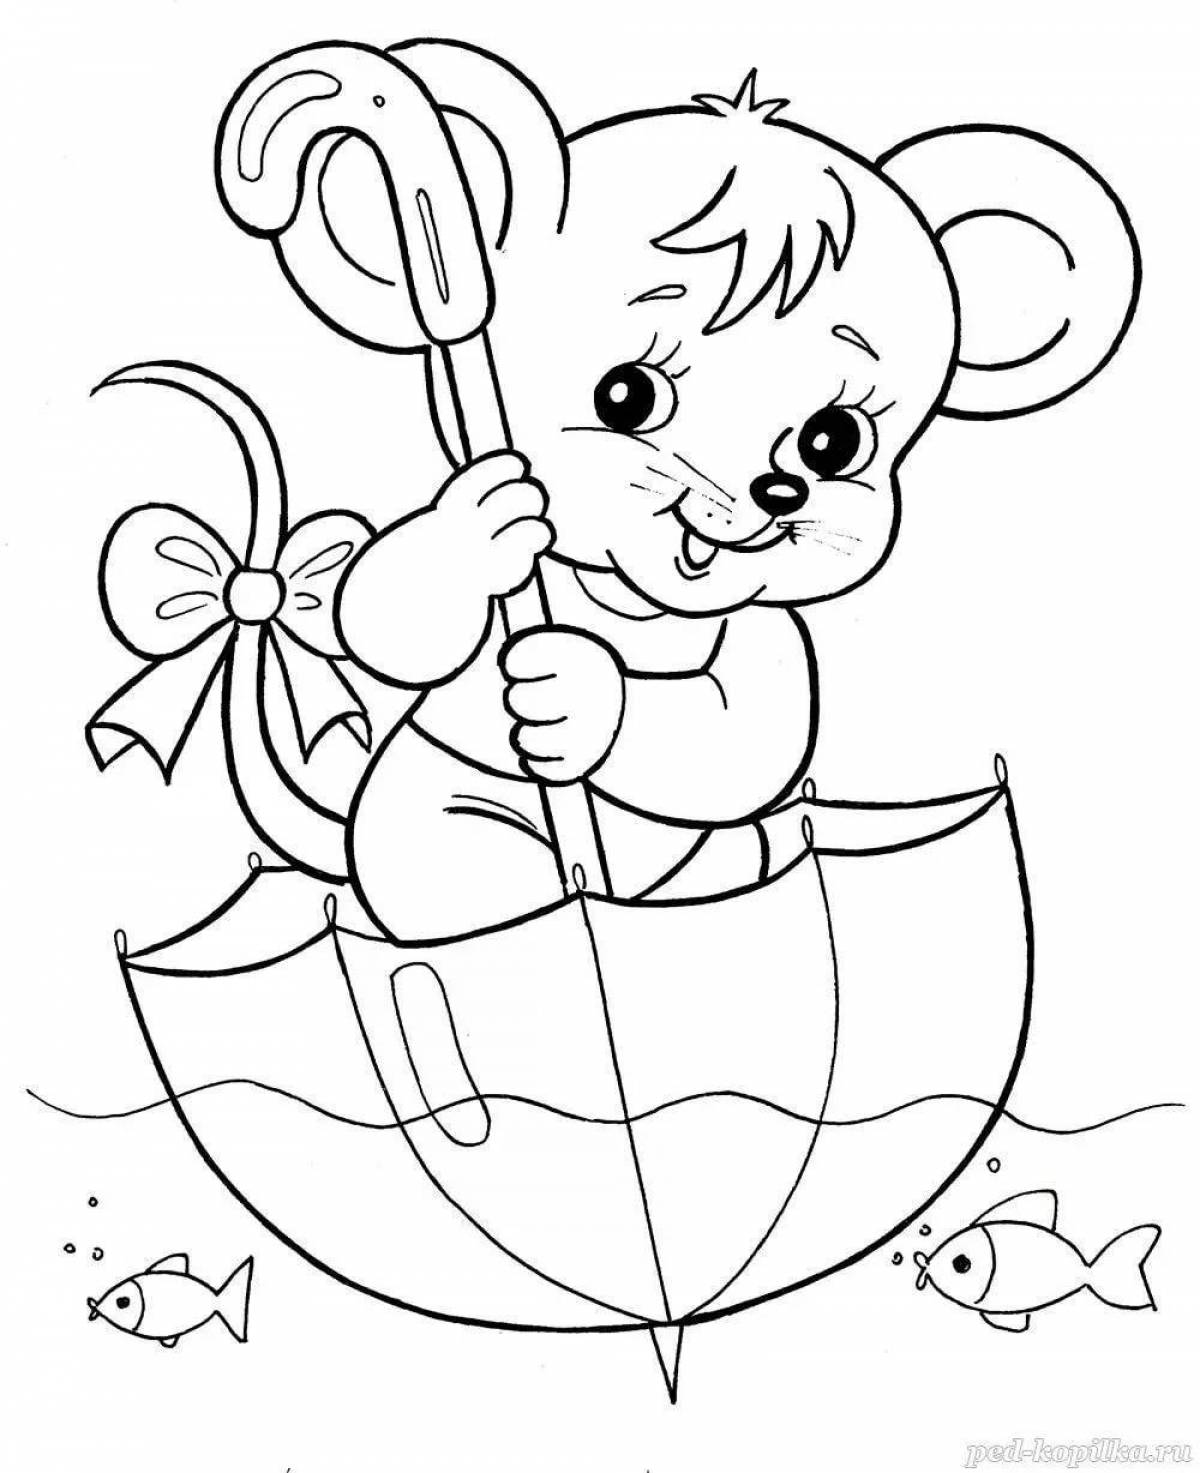 Adorable coloring book for kids 5-6 years old